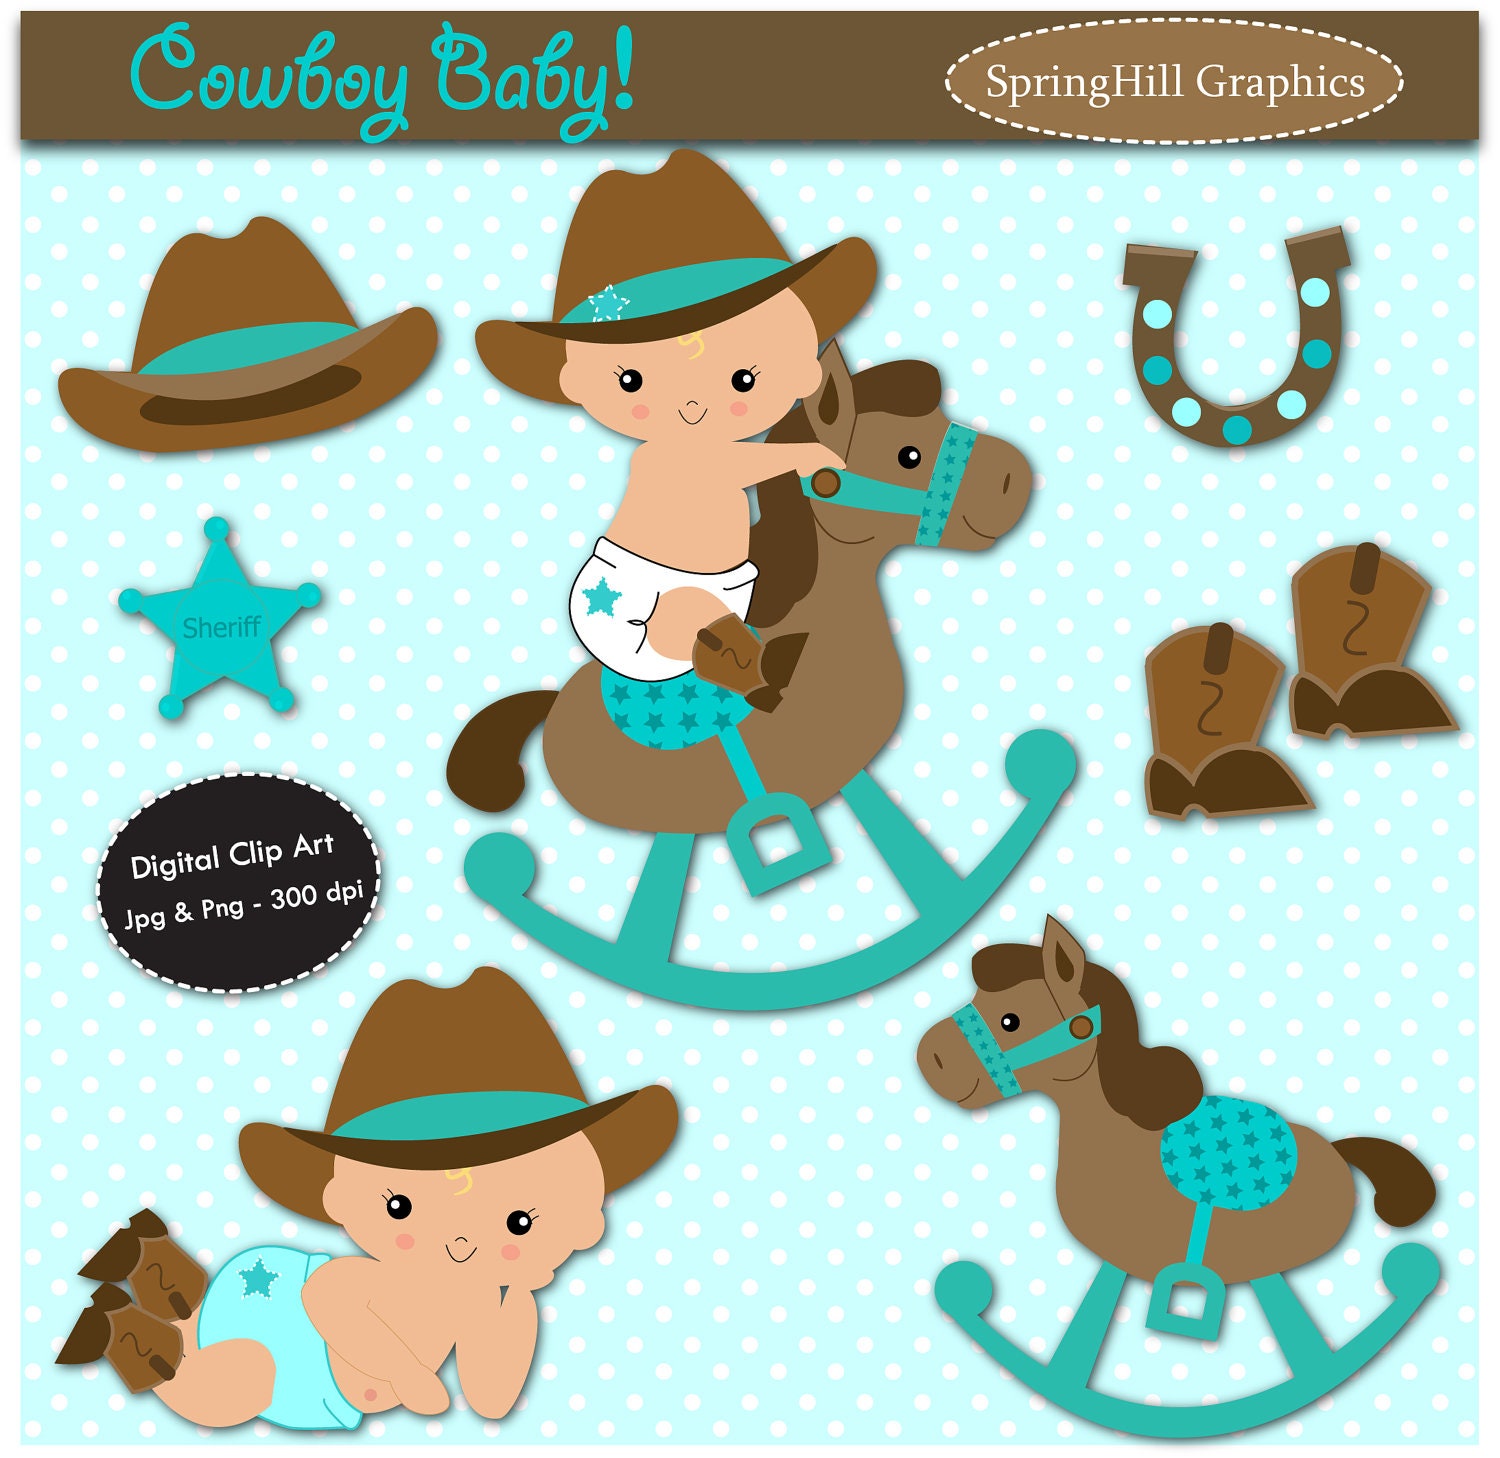 free baby cowboy clipart - photo #11